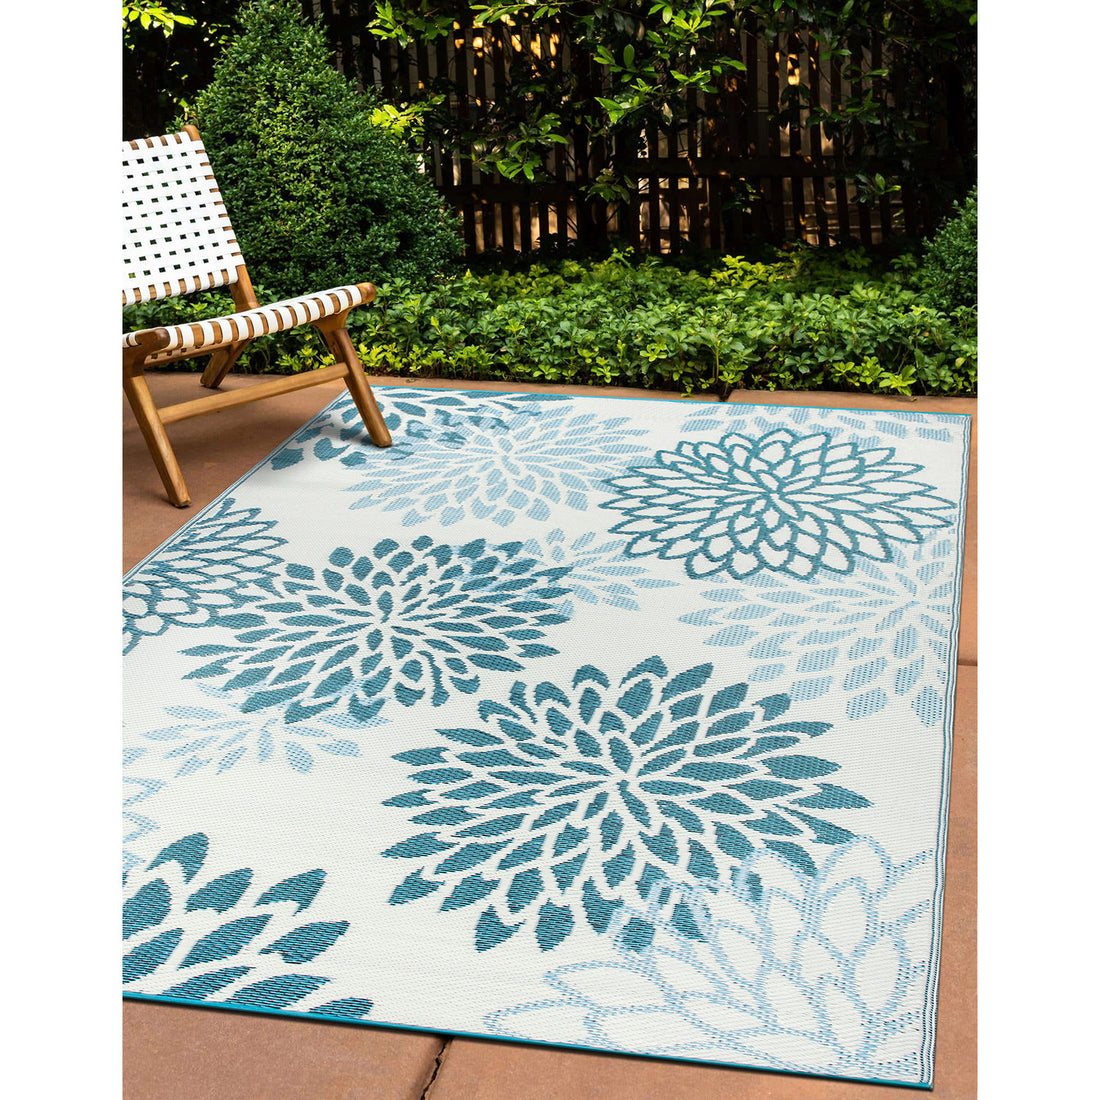 Modern Floral Aloha Reversible Recycled Plastic Outdoor Rugs